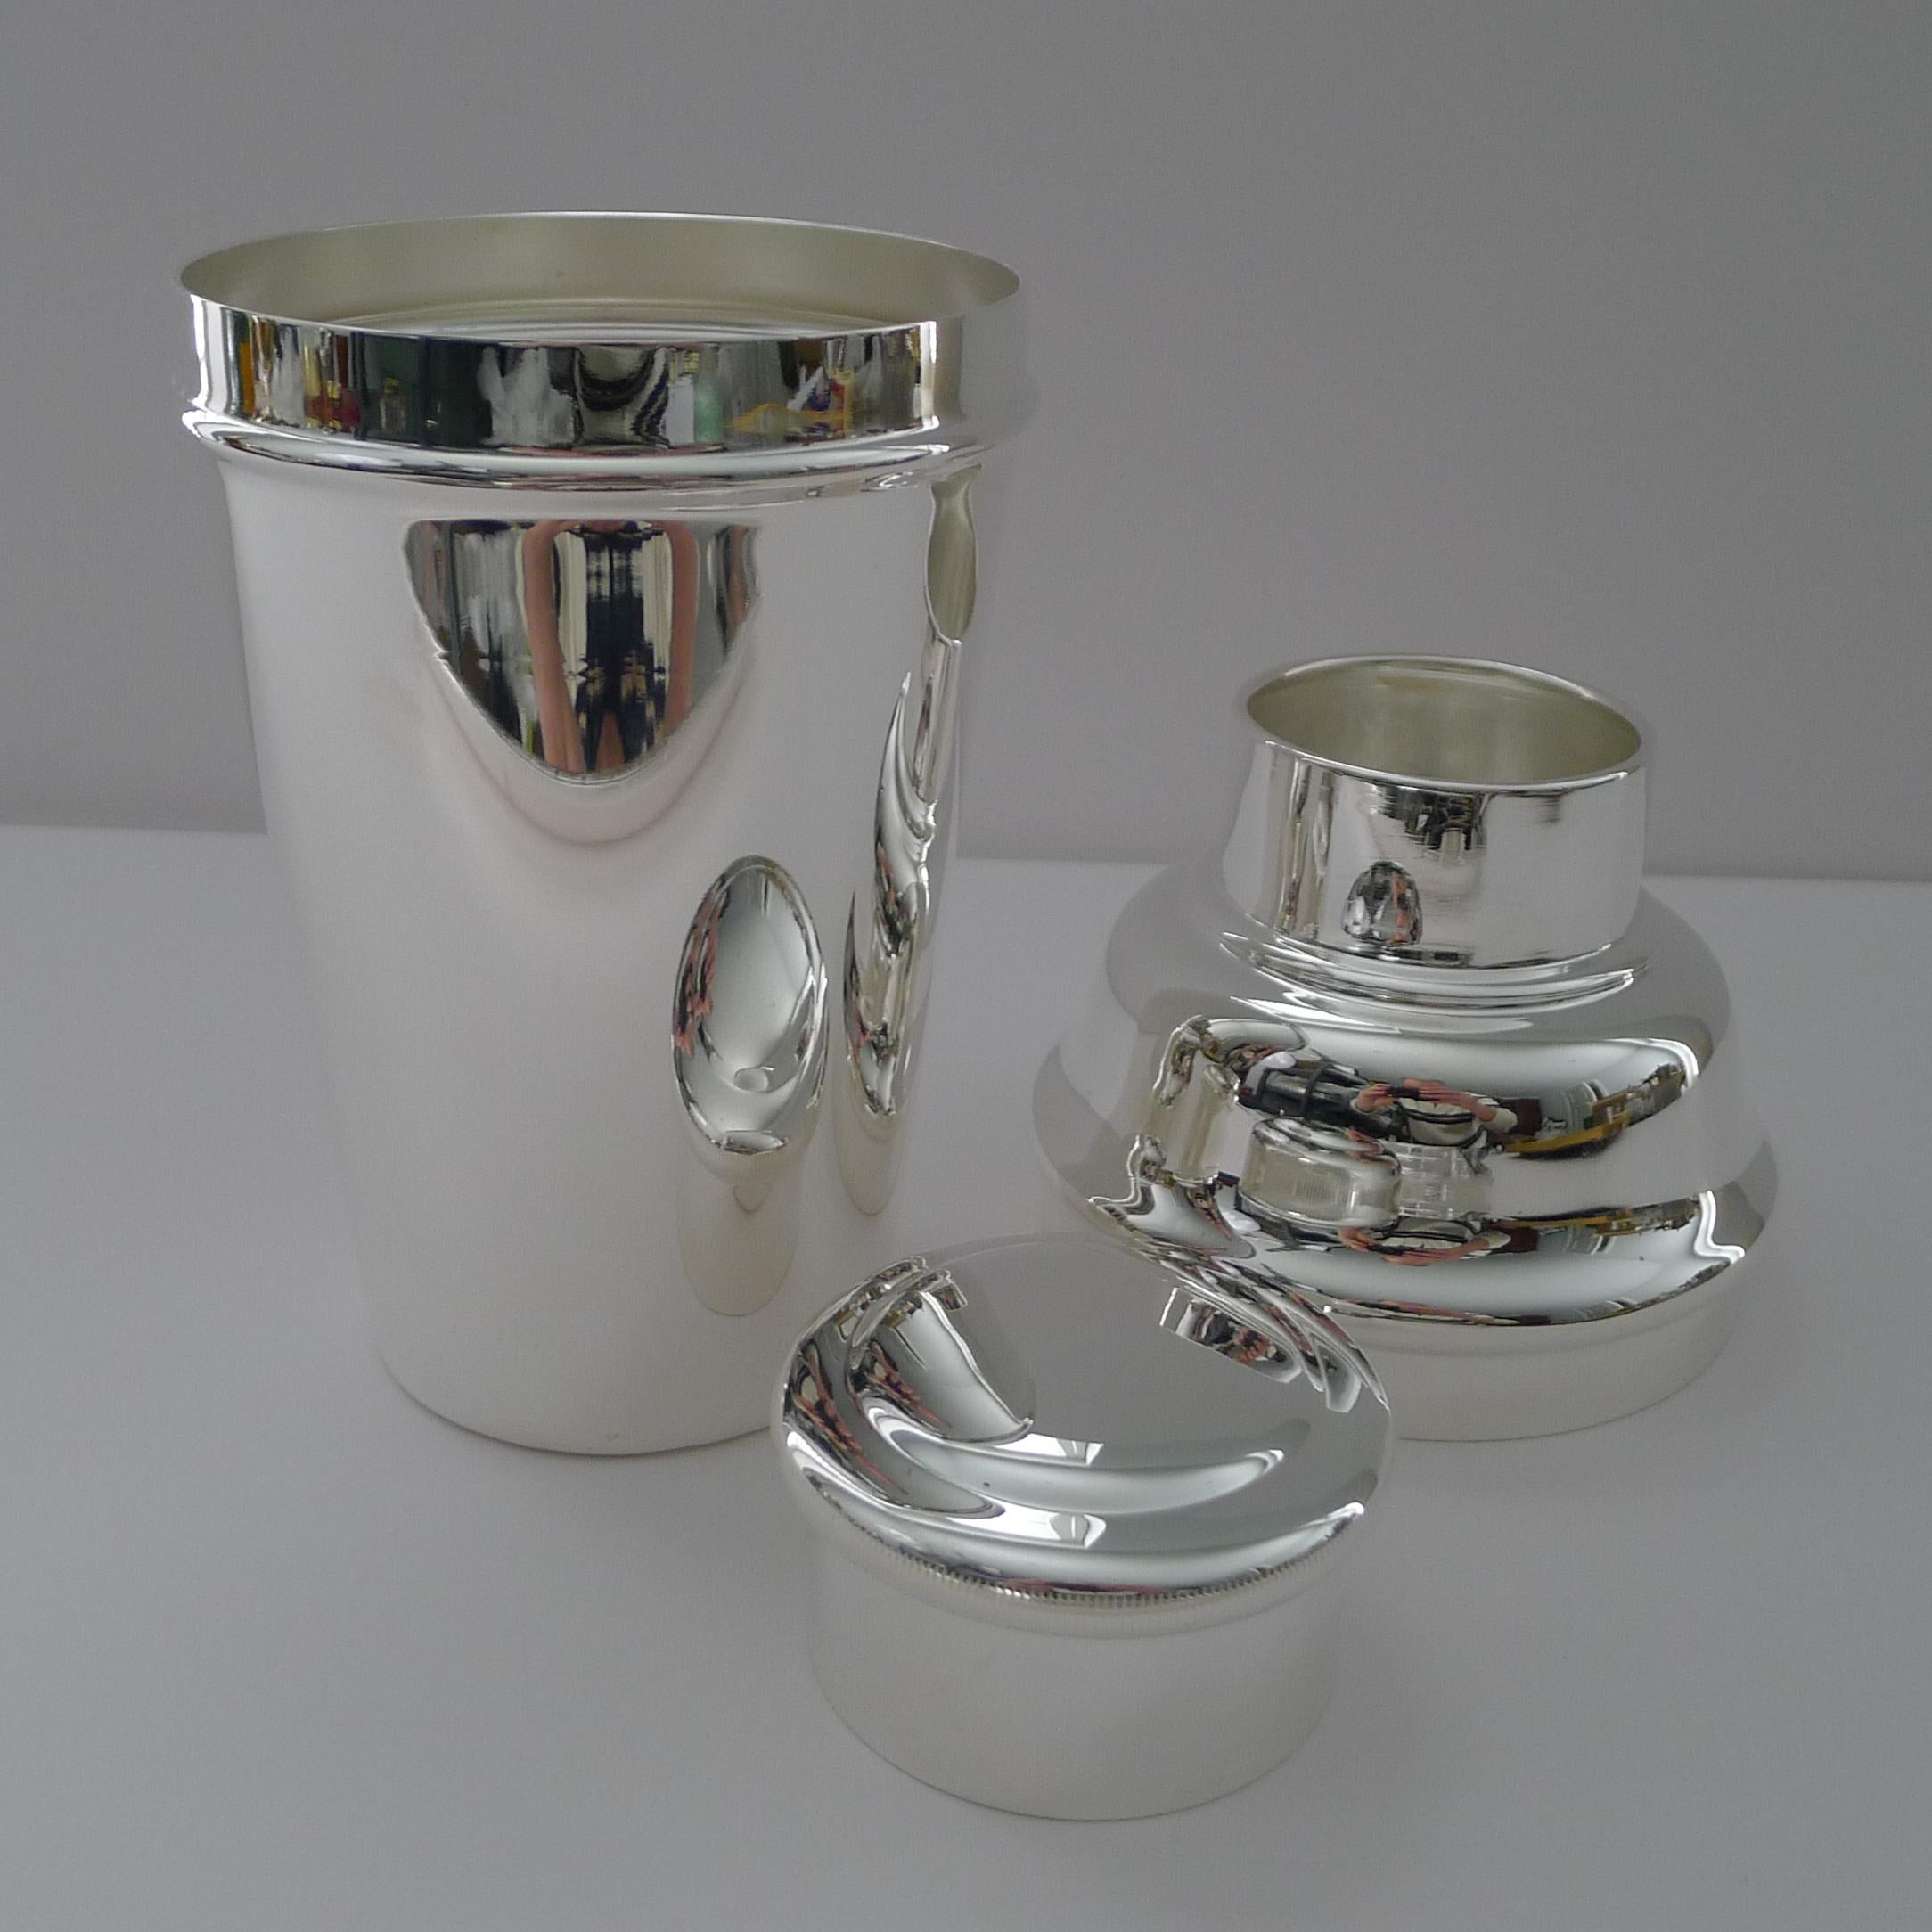 Silver Plate Smart Art Deco Shaker by William Suckling c.1930 - 1 1/4 Pints For Sale